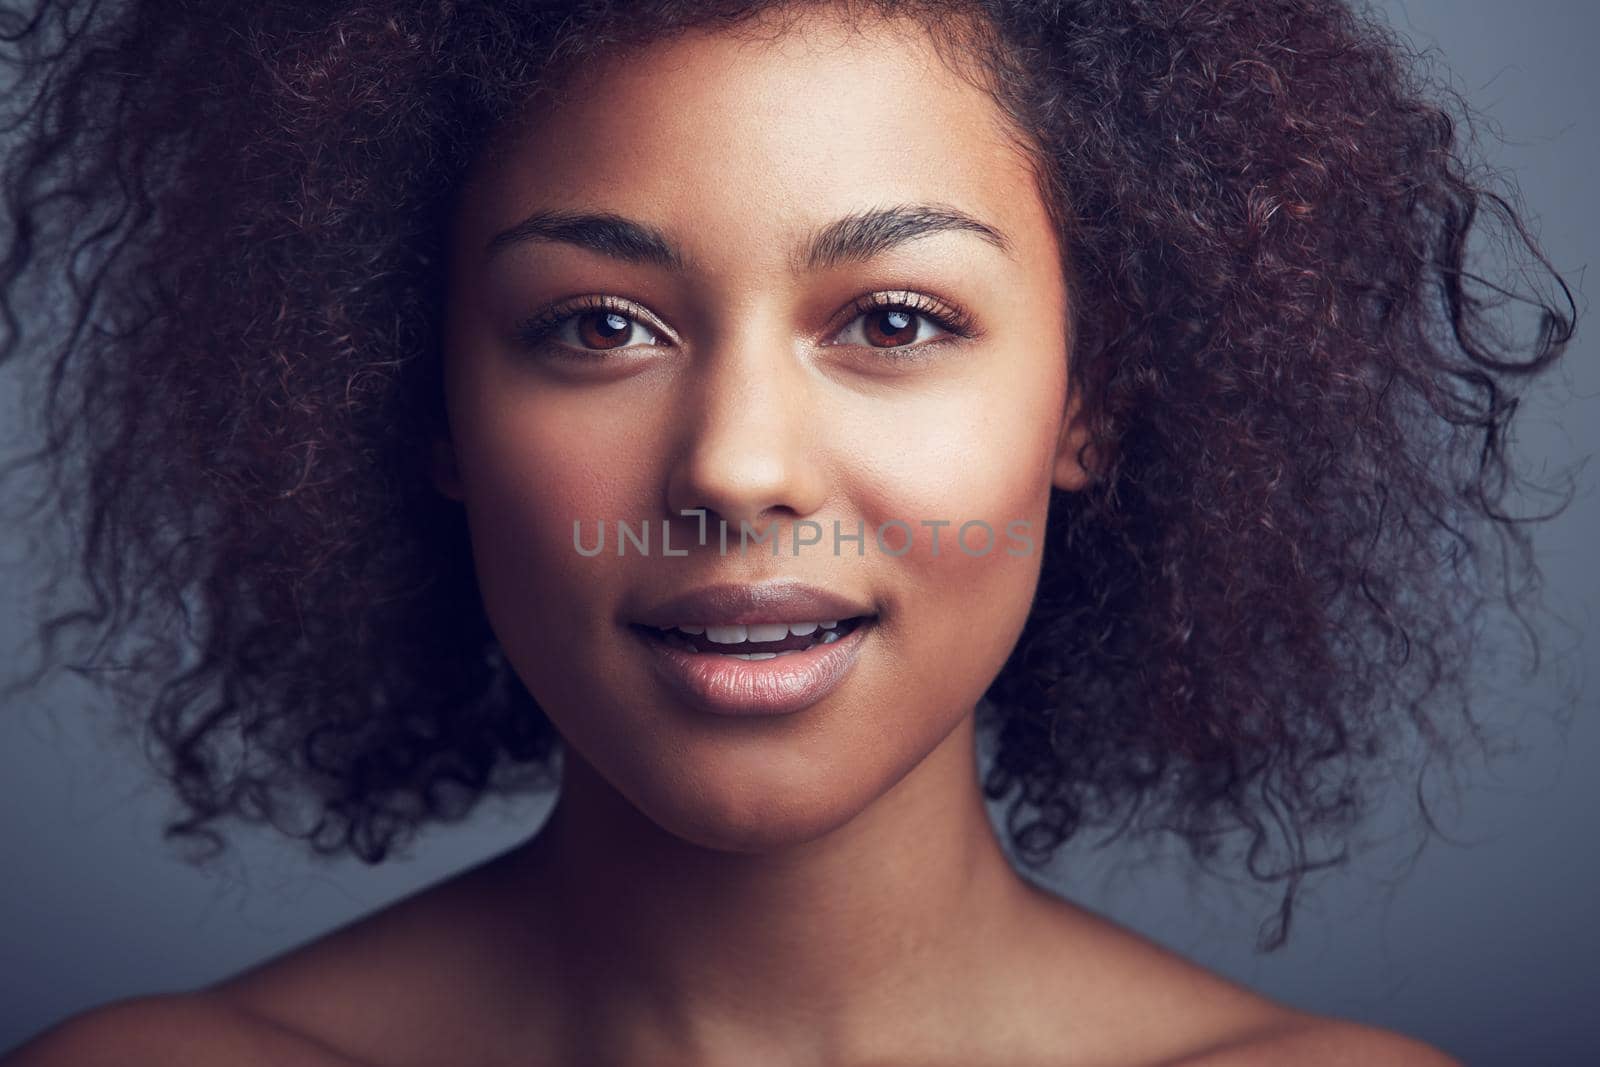 Beauty portrait of a young woman.